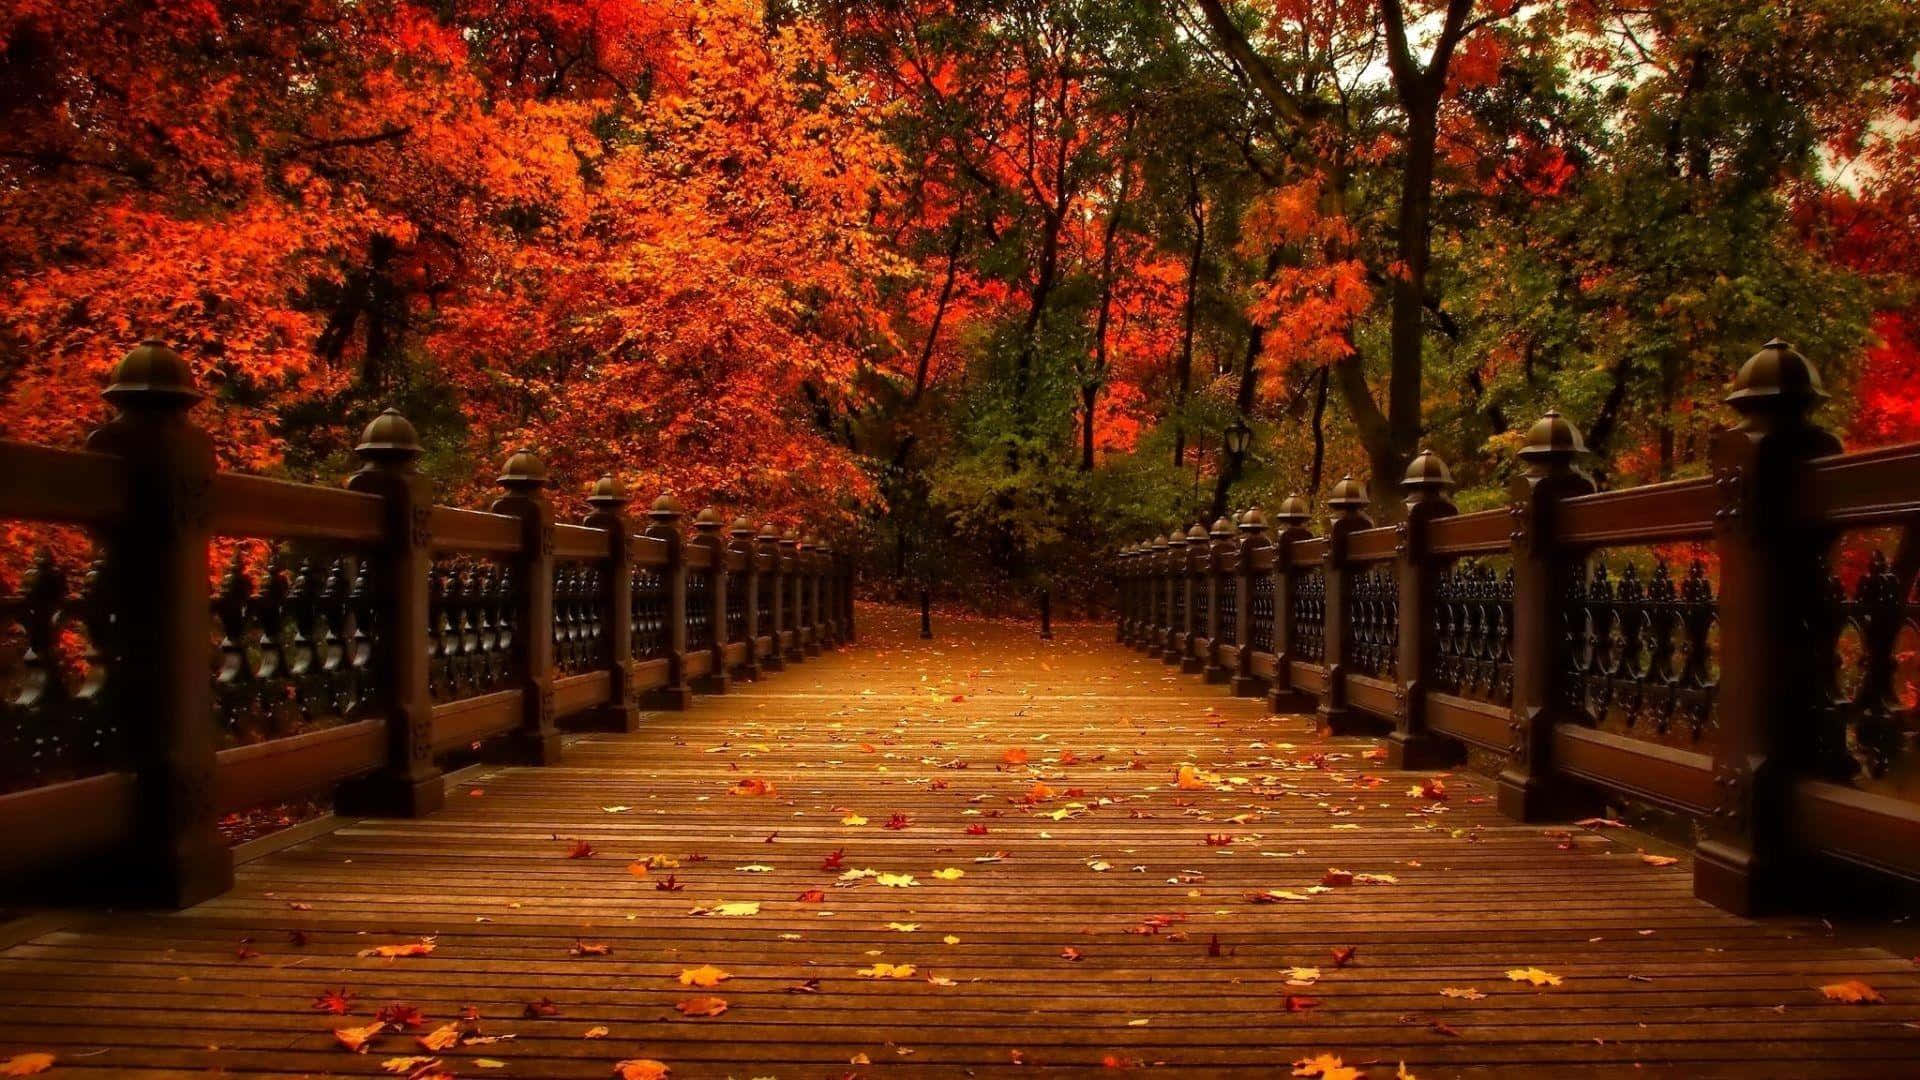 A Wooden Bridge With Red Leaves In The Background Wallpaper